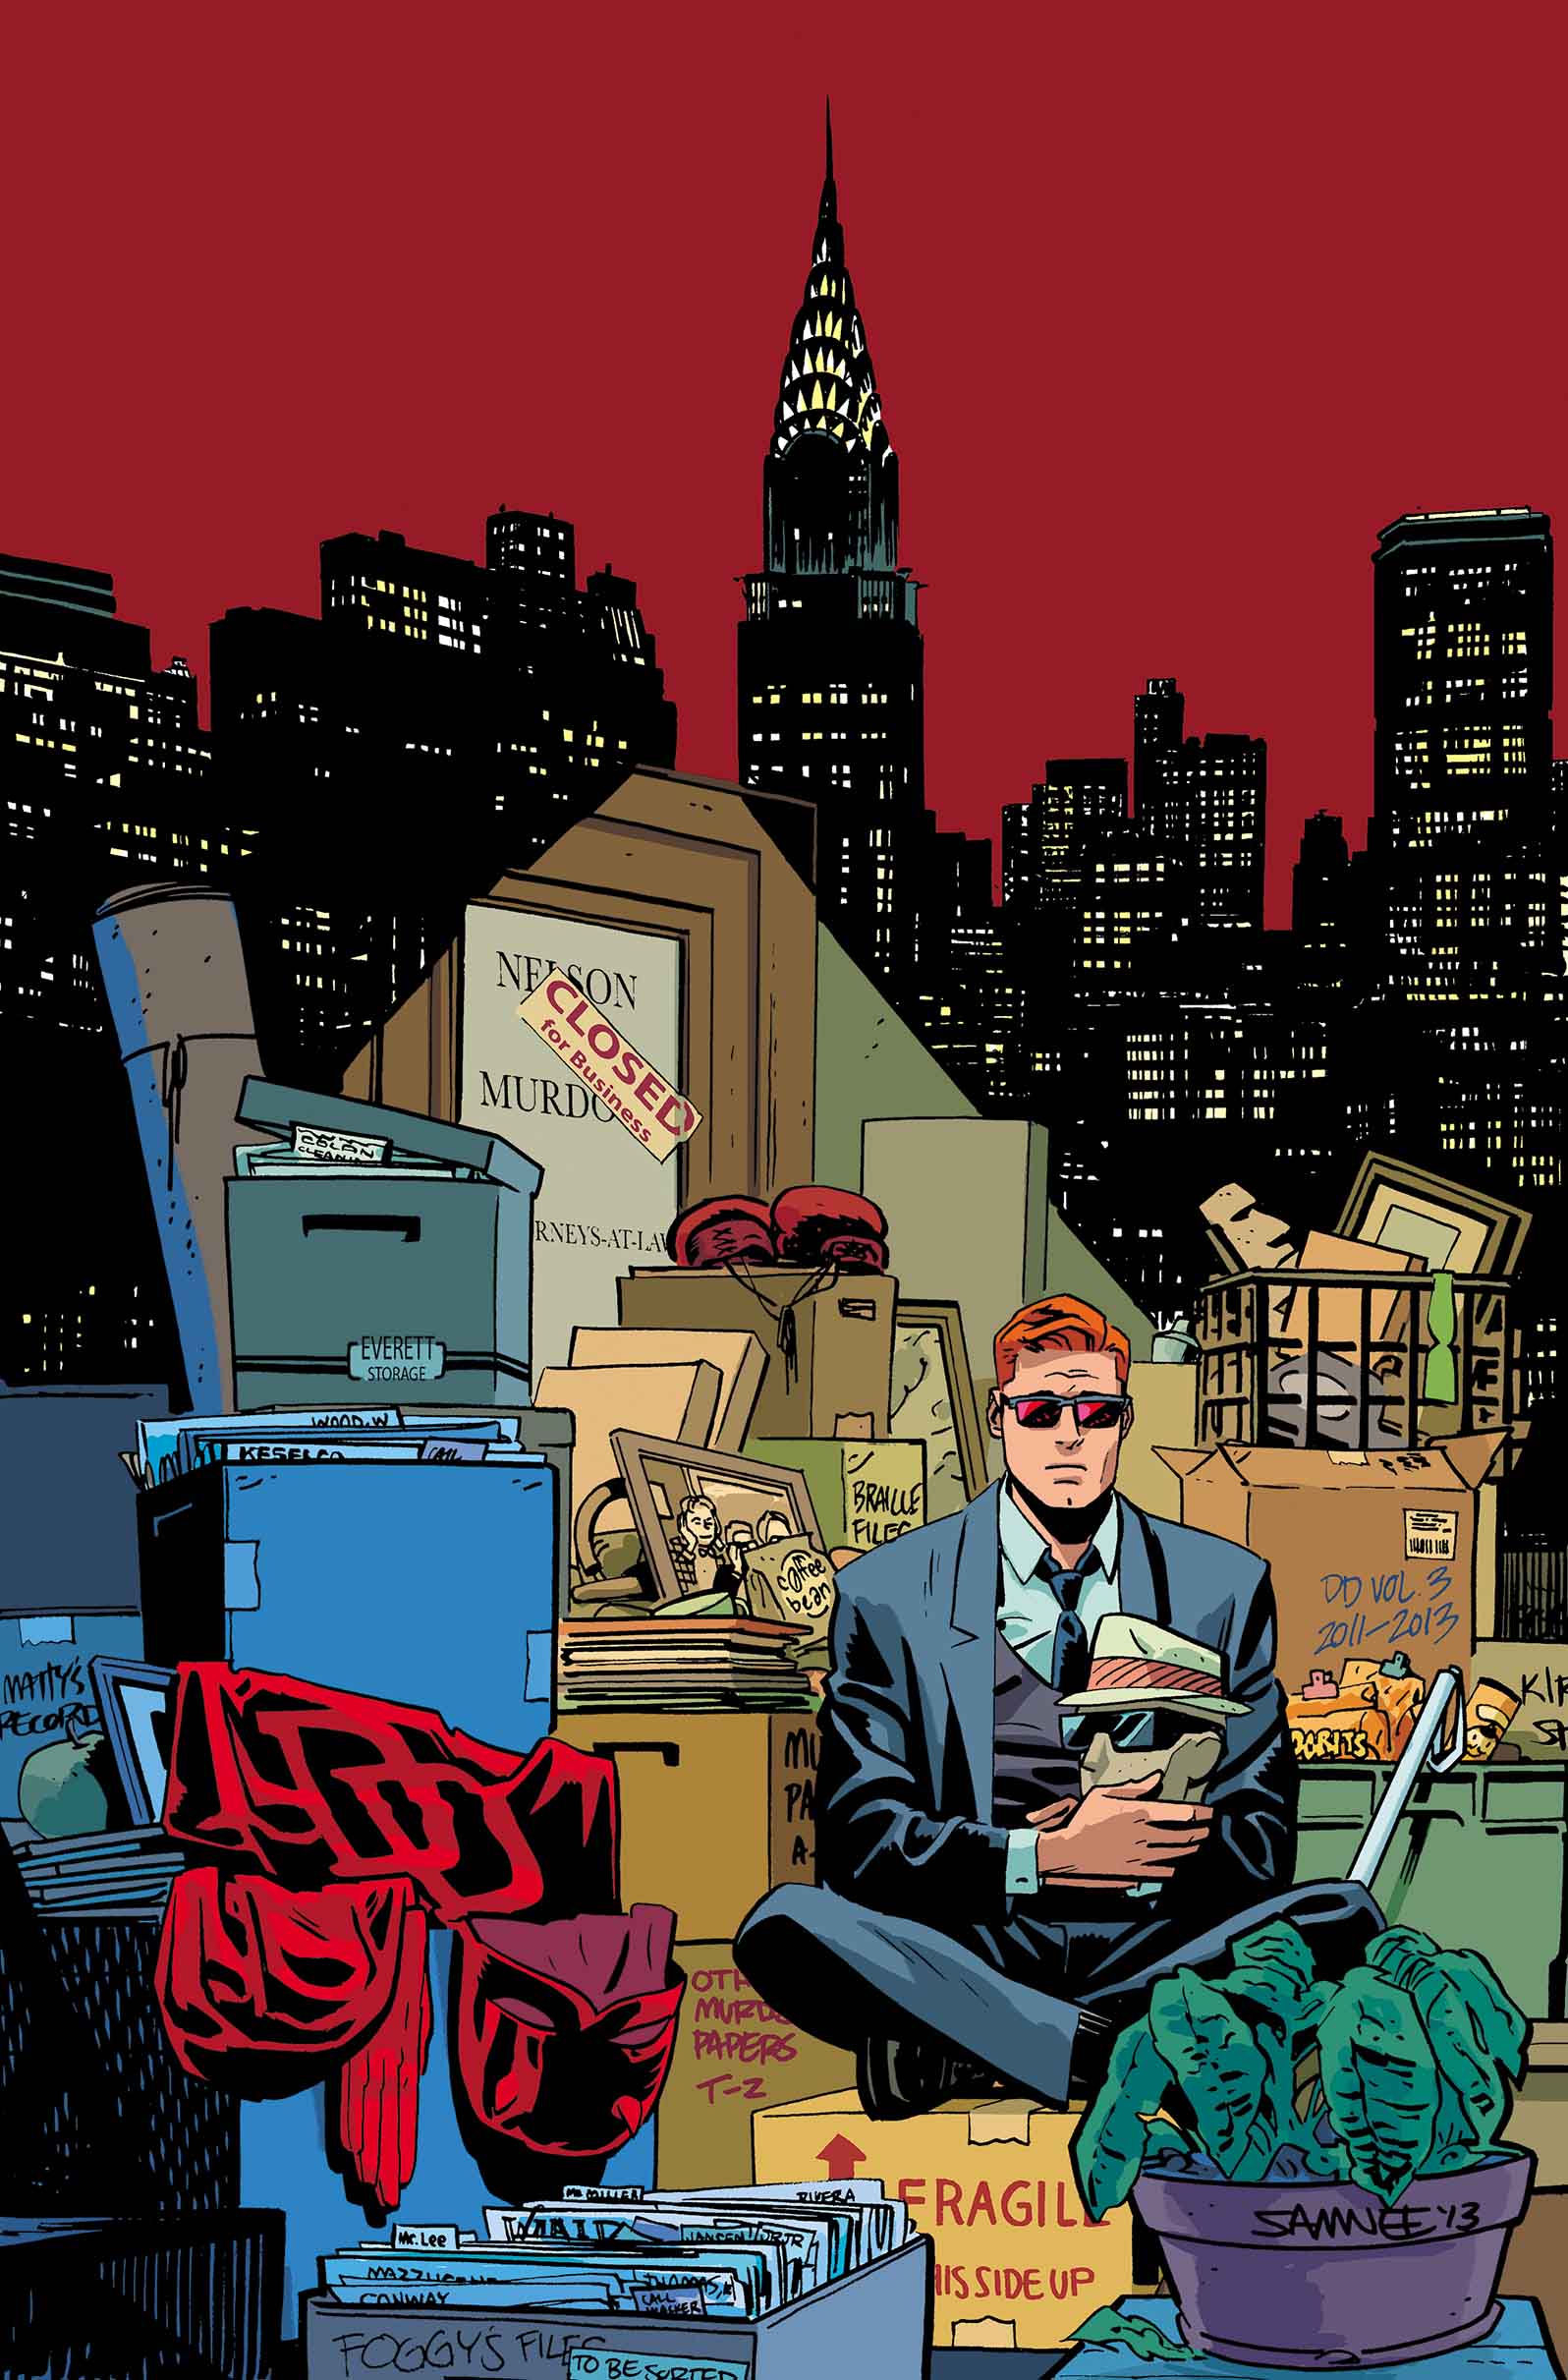 The End? Or the Beginning? Your First Look at DAREDEVIL #36!